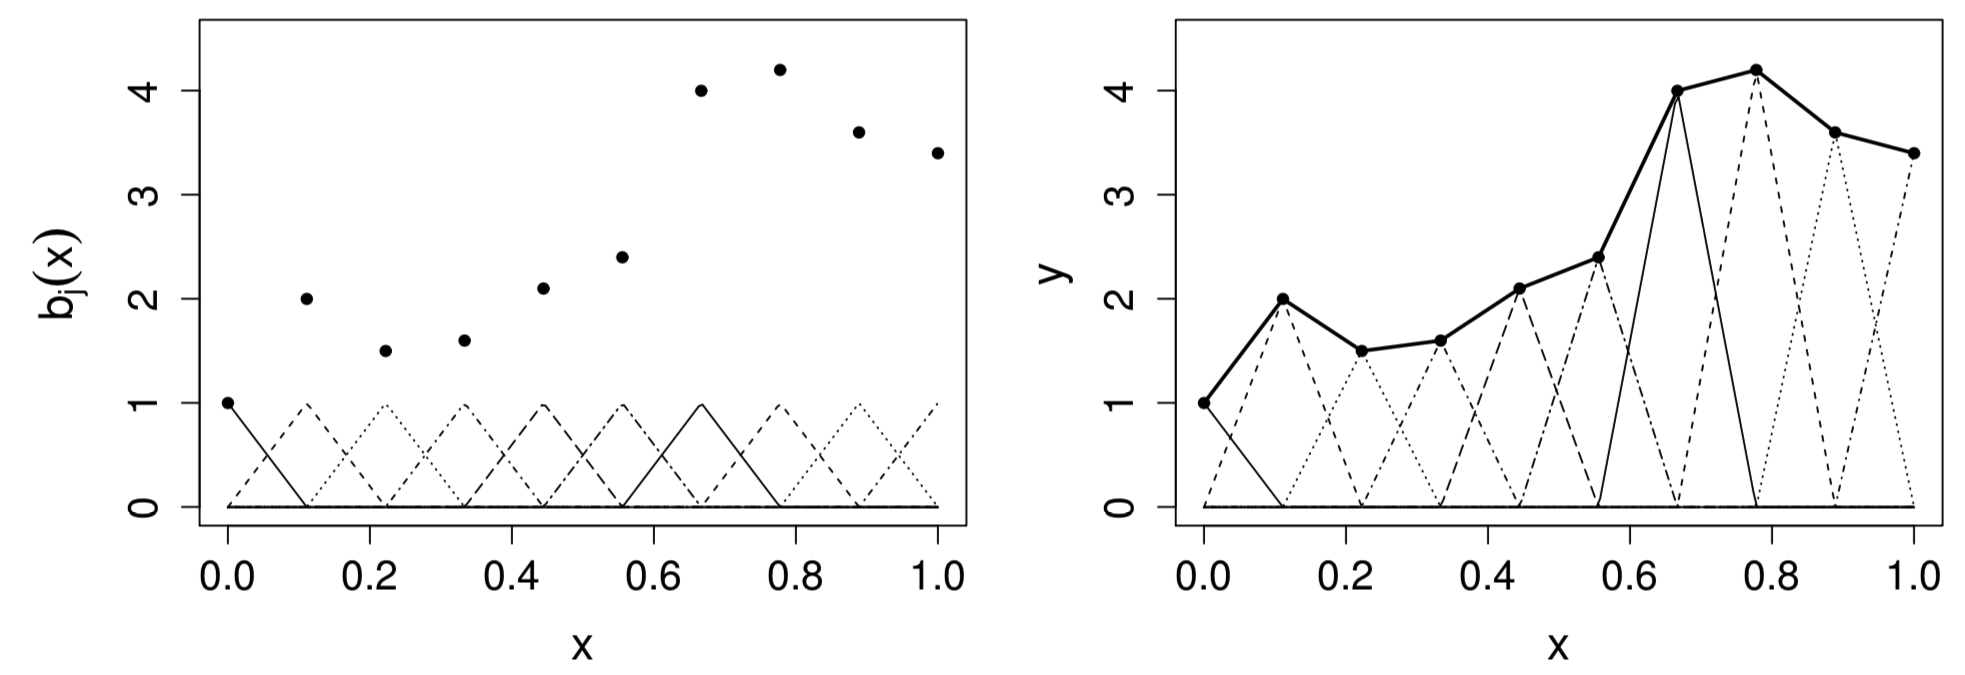 Left: tent function basis, for interpolating the data shown as black dots. Right: the basis functiosn are each multiplied by a coefficient, before being summed